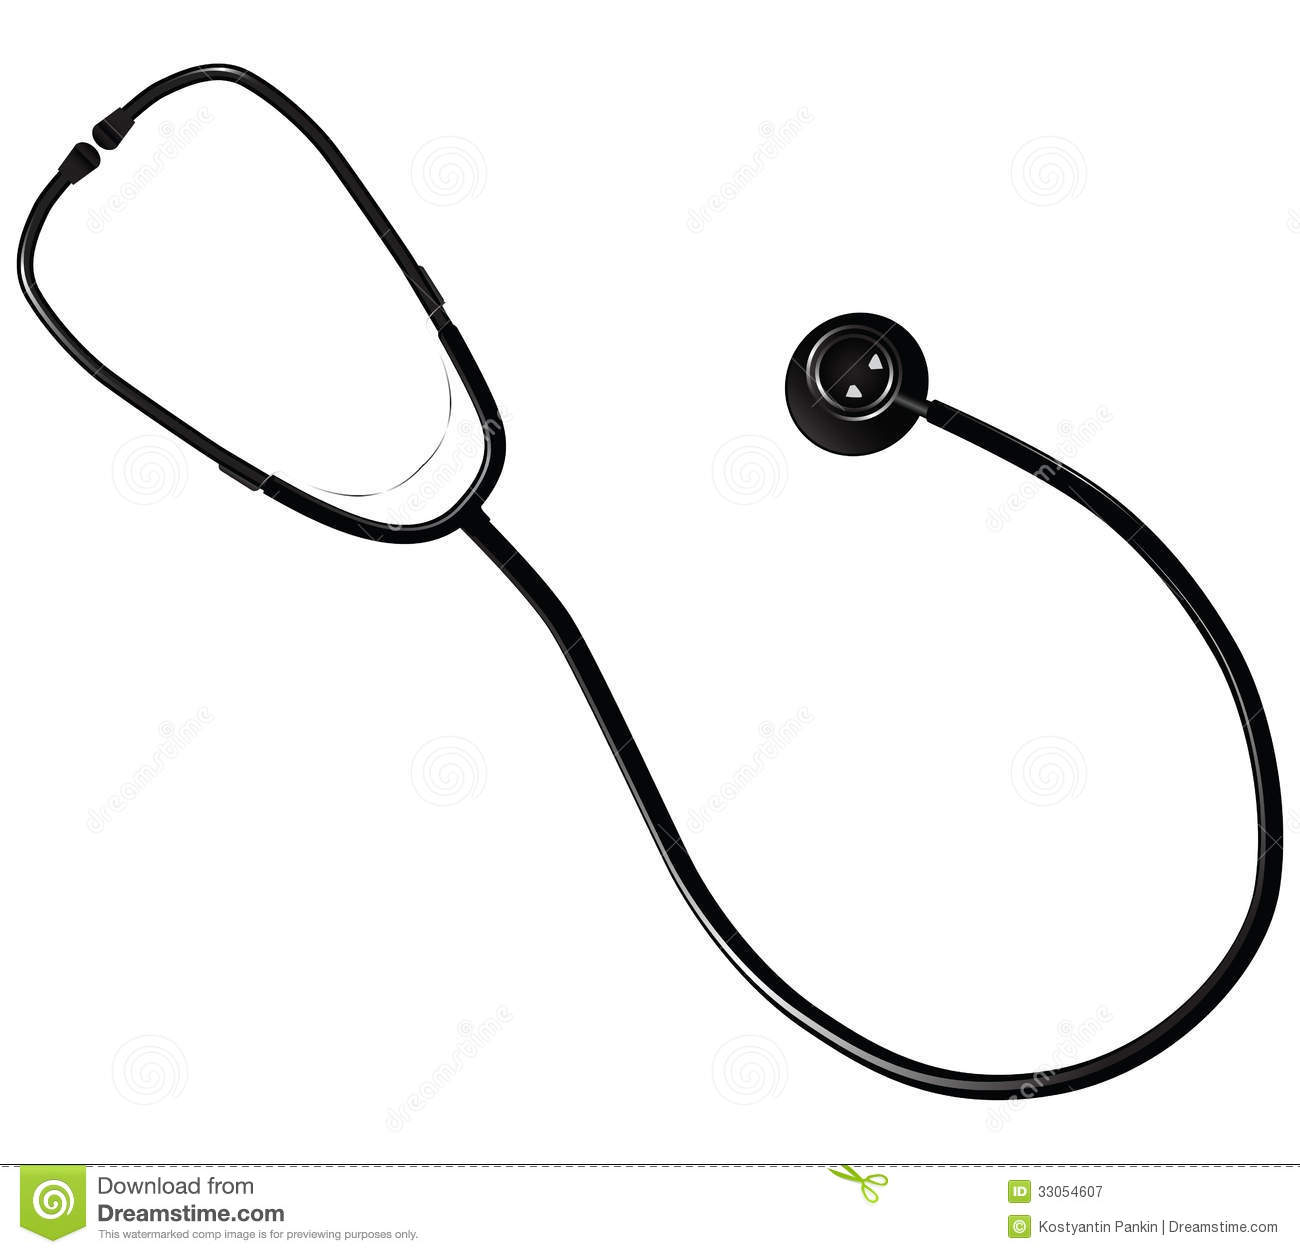 Medical Stethoscope   Research Equipment In Medical Practice  Vector